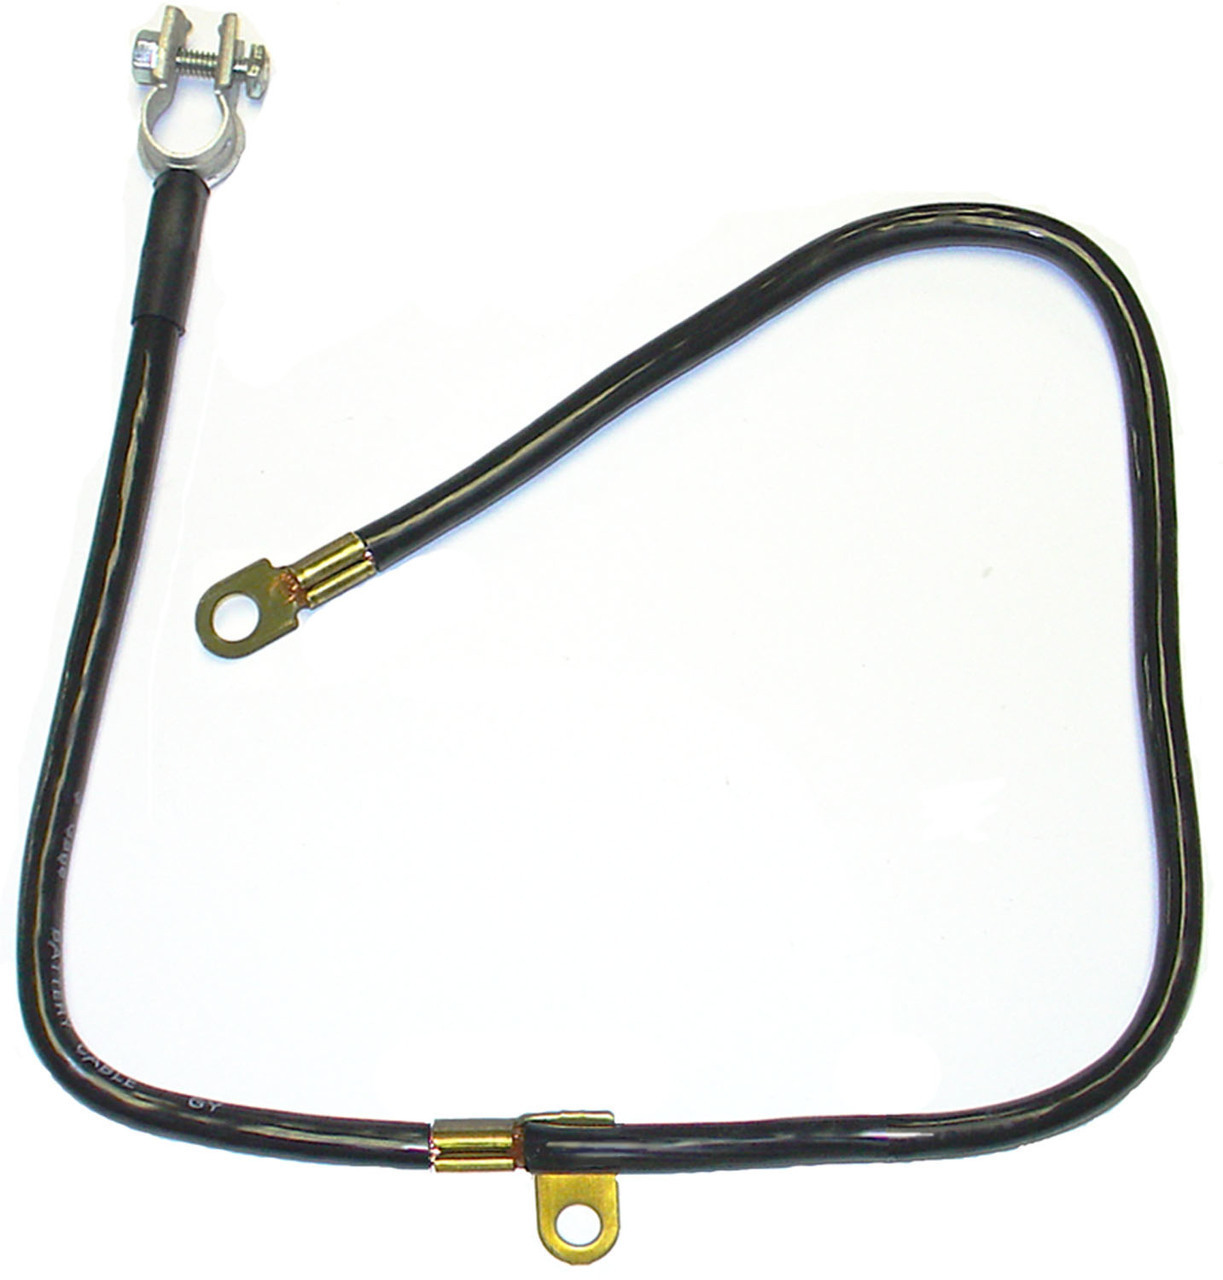 1998 Nissan sentra battery cables #6